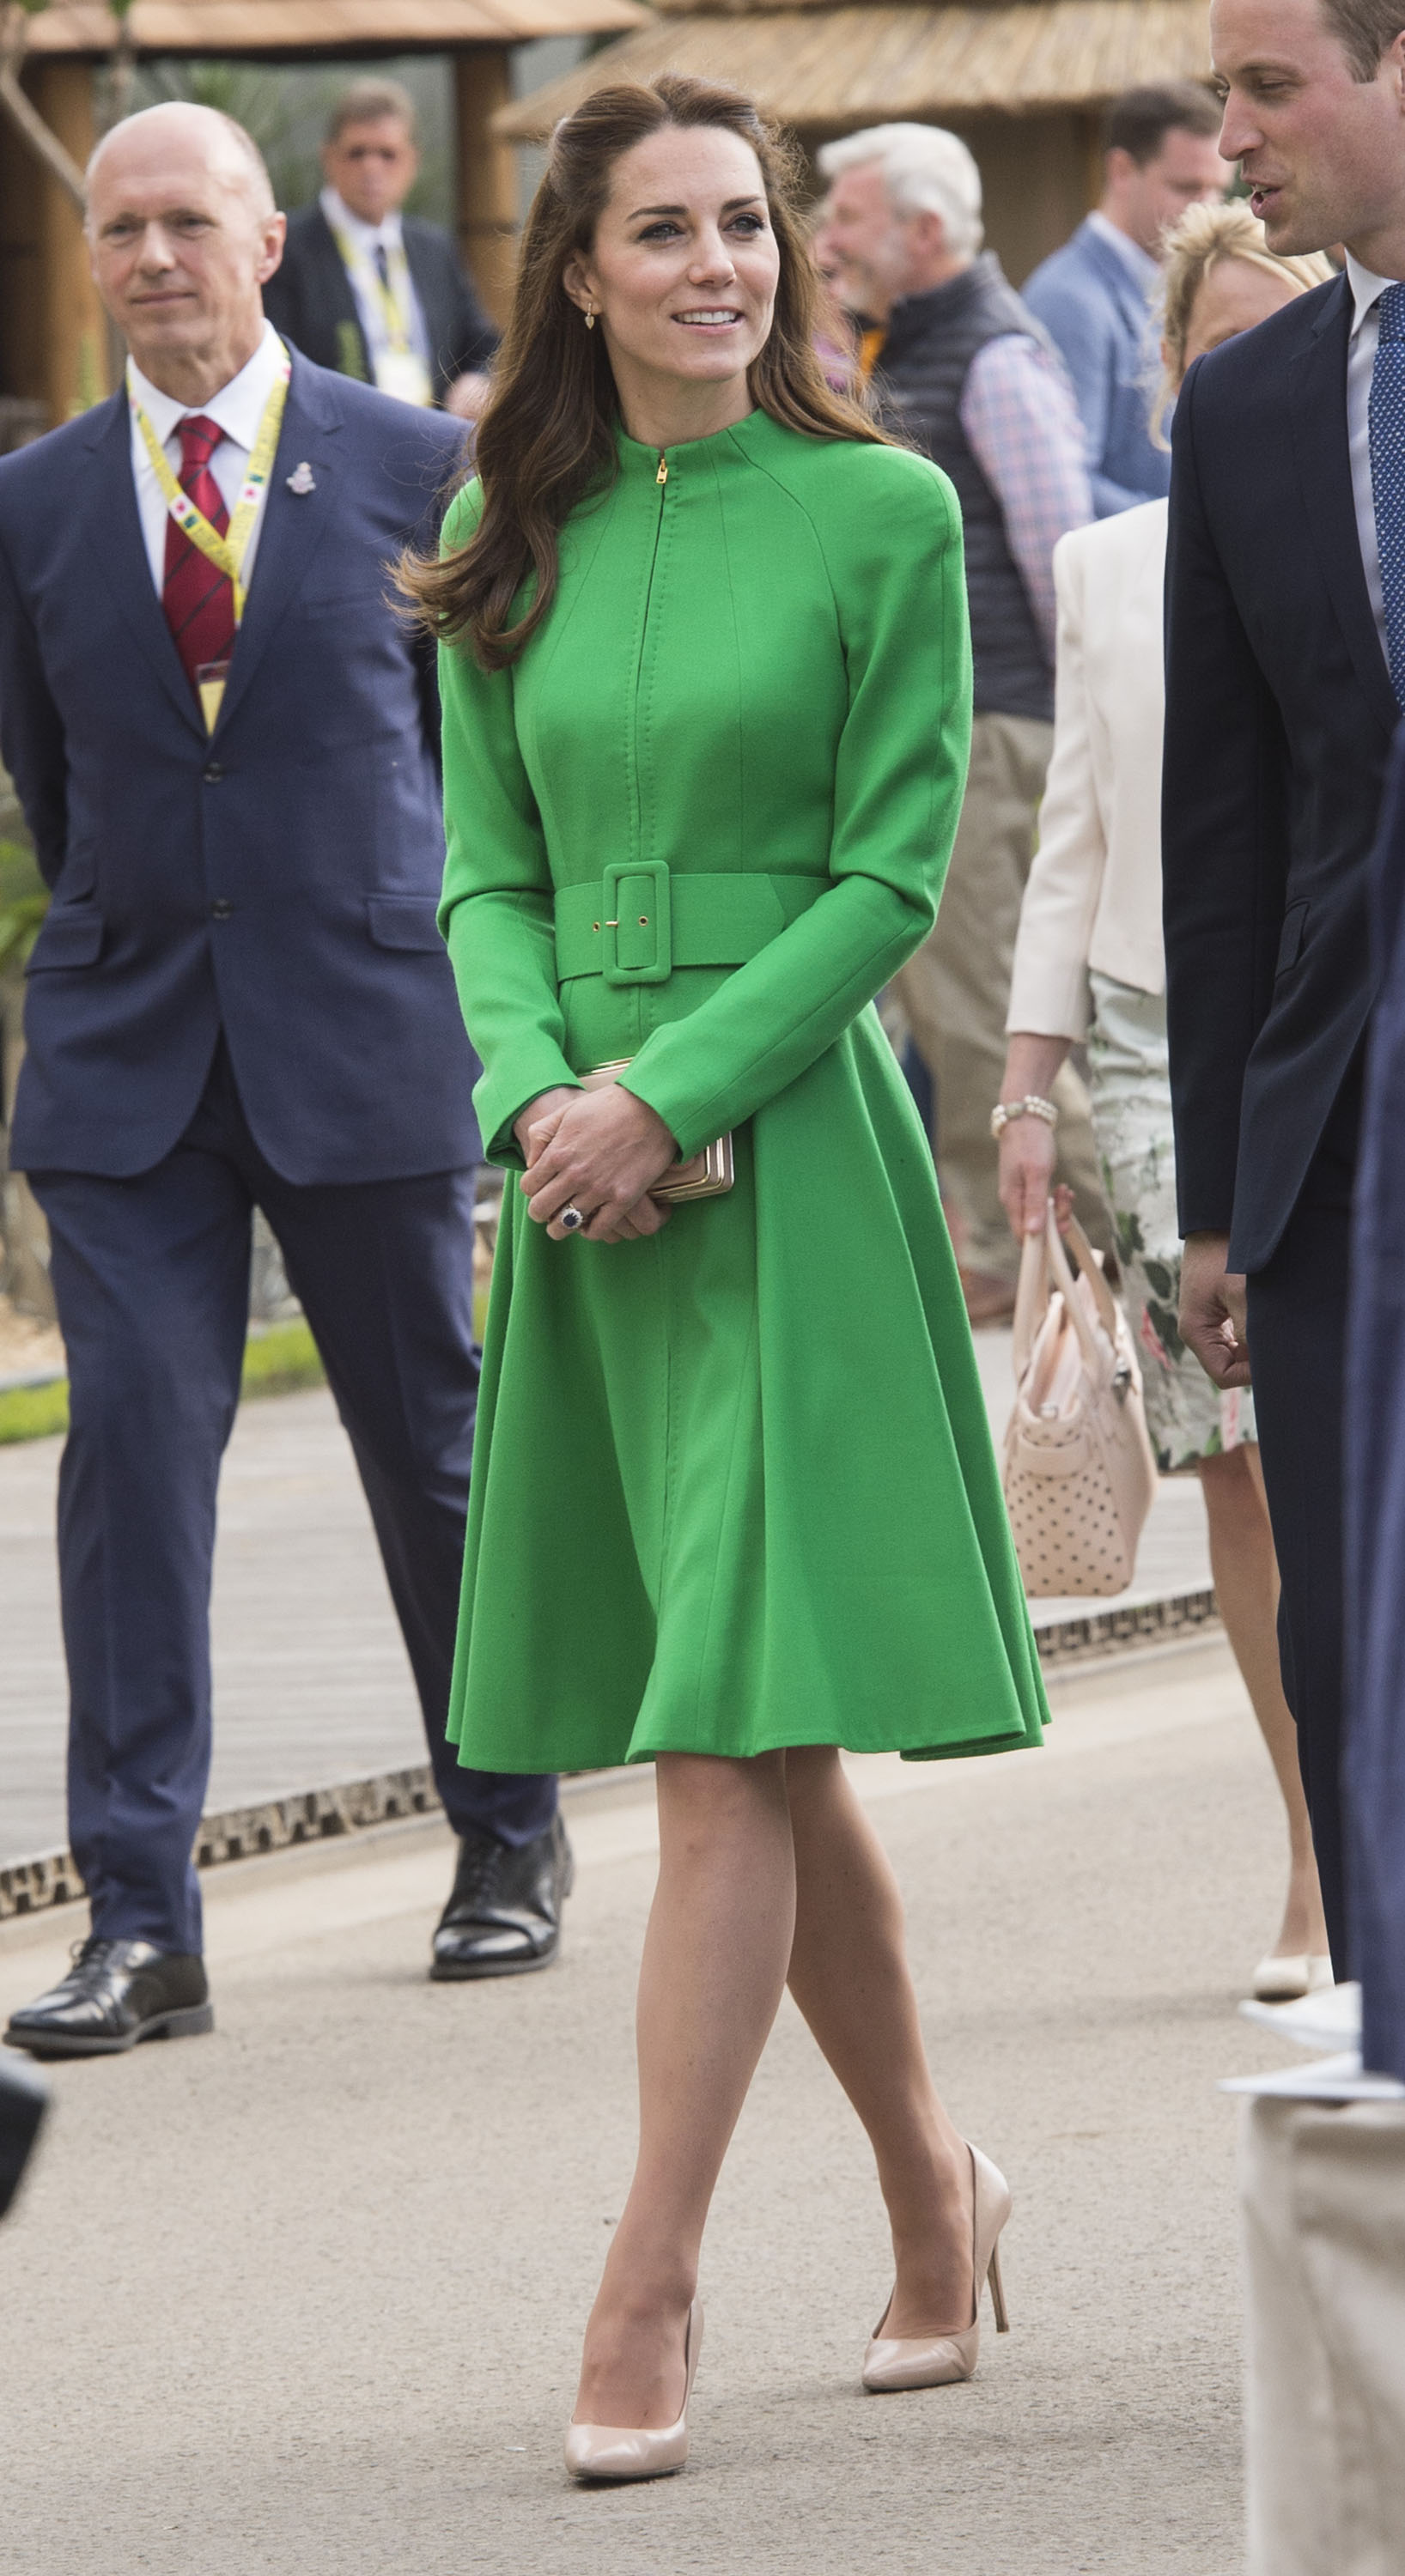 Catherine, Duchess of Cambridge attends Chelsea Flower Show press day at Royal Hospital Chelsea in London on May 23, 2016.